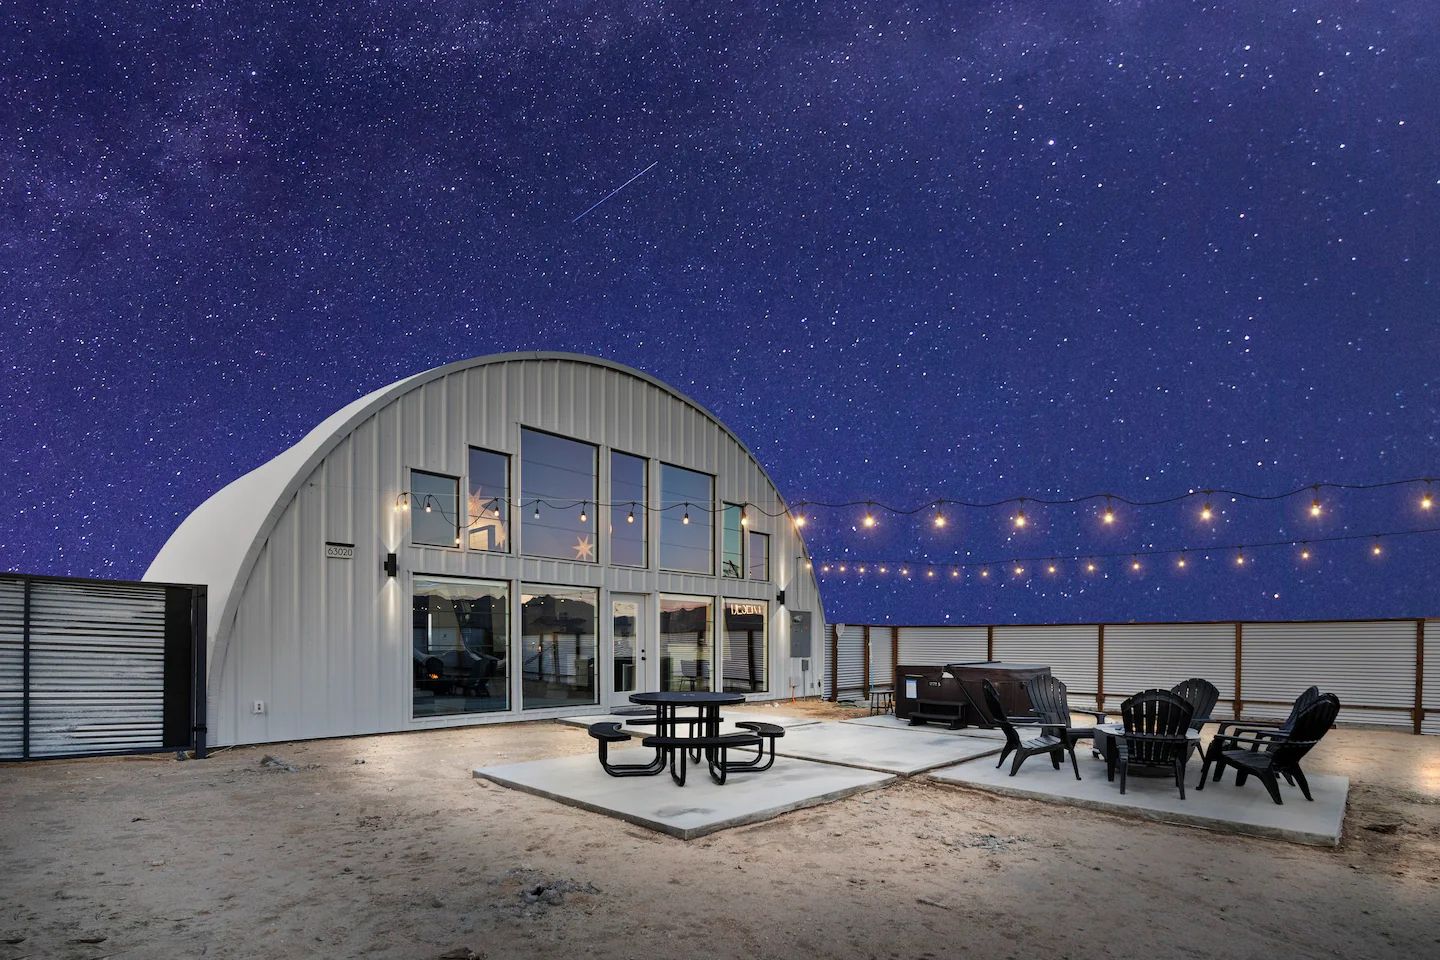 An airplane hangar converted into an airbnb has patio furniture, a hot tub and a fire pit in its fenced yard in the desert under a starry night sky.